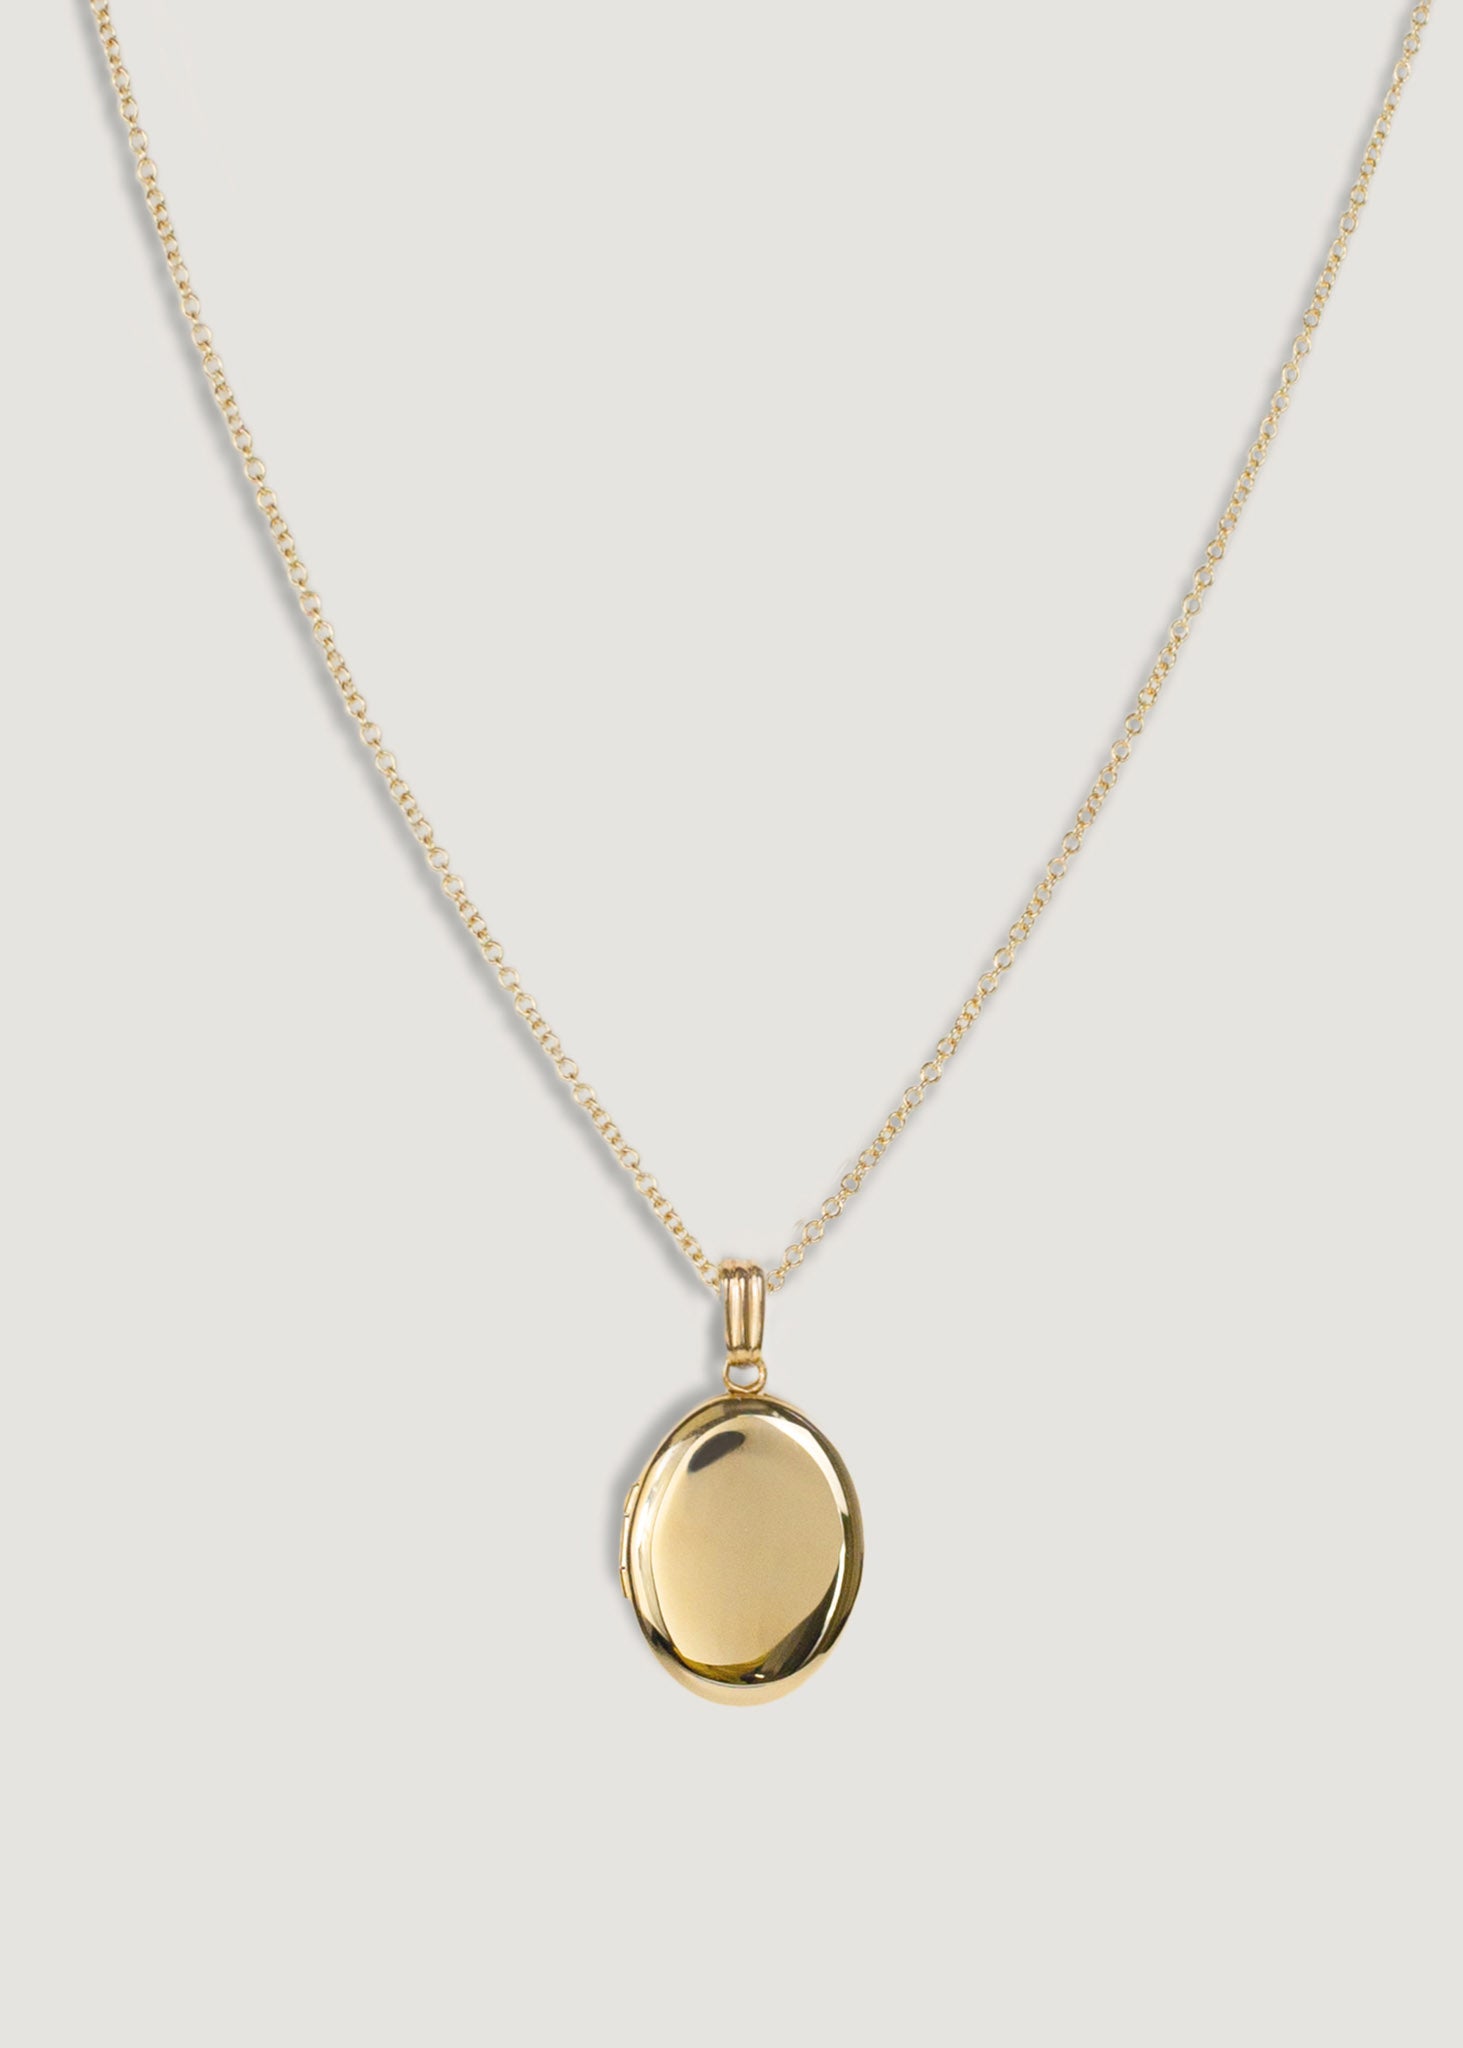 Mini Oval Locket Necklace Gold Filled / 16-18